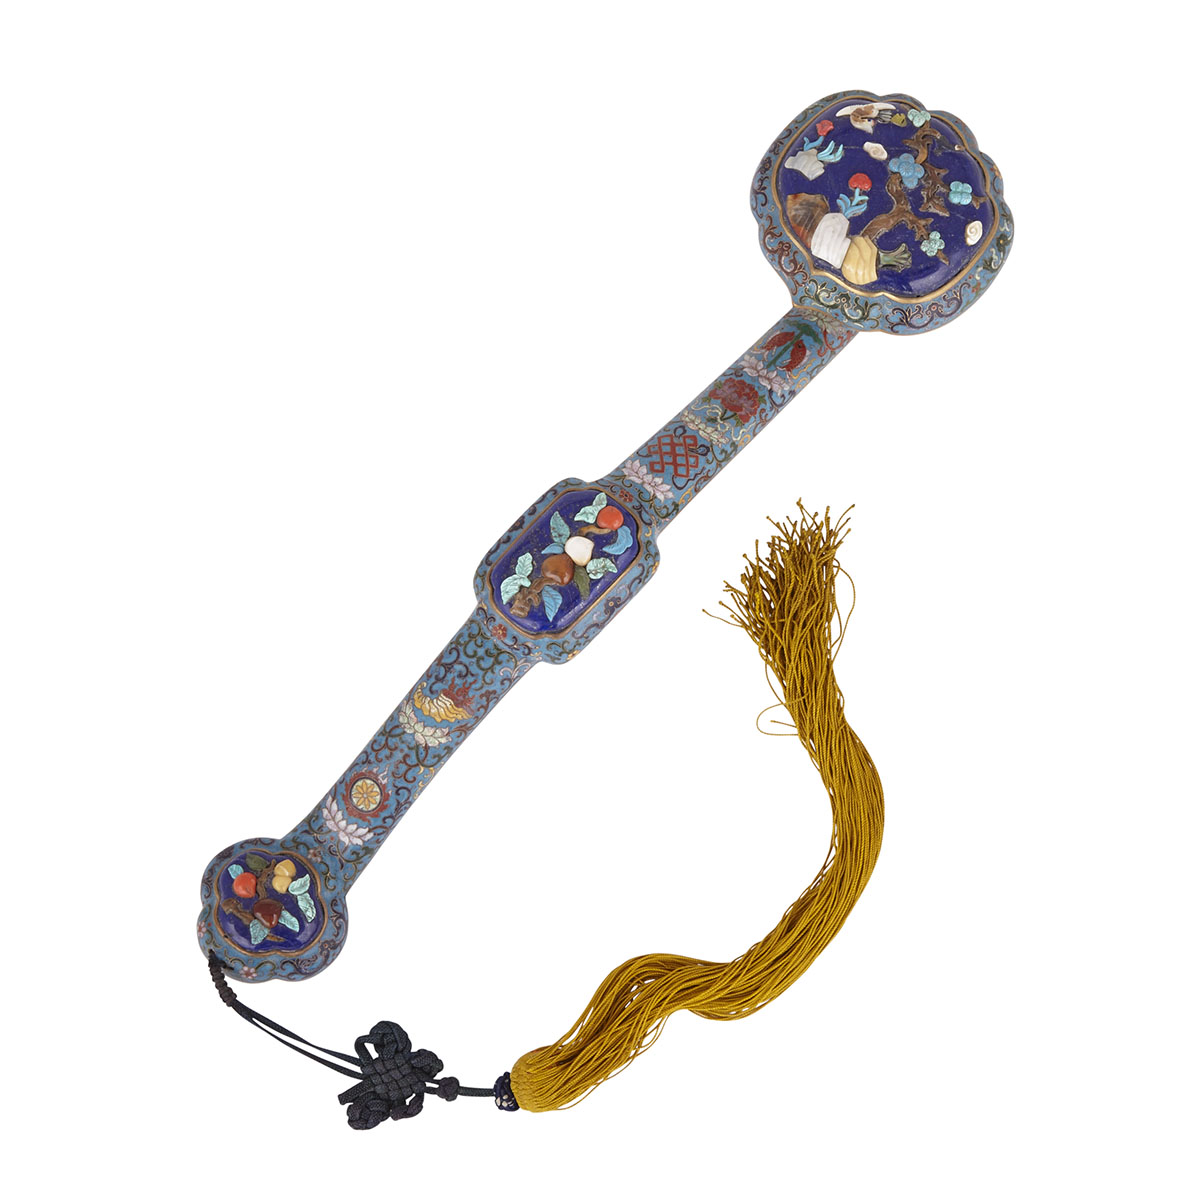 Cloisonné Enamel and Lapis Gemstone Inlays Ruyi Sceptre, Late Qing Dynasty